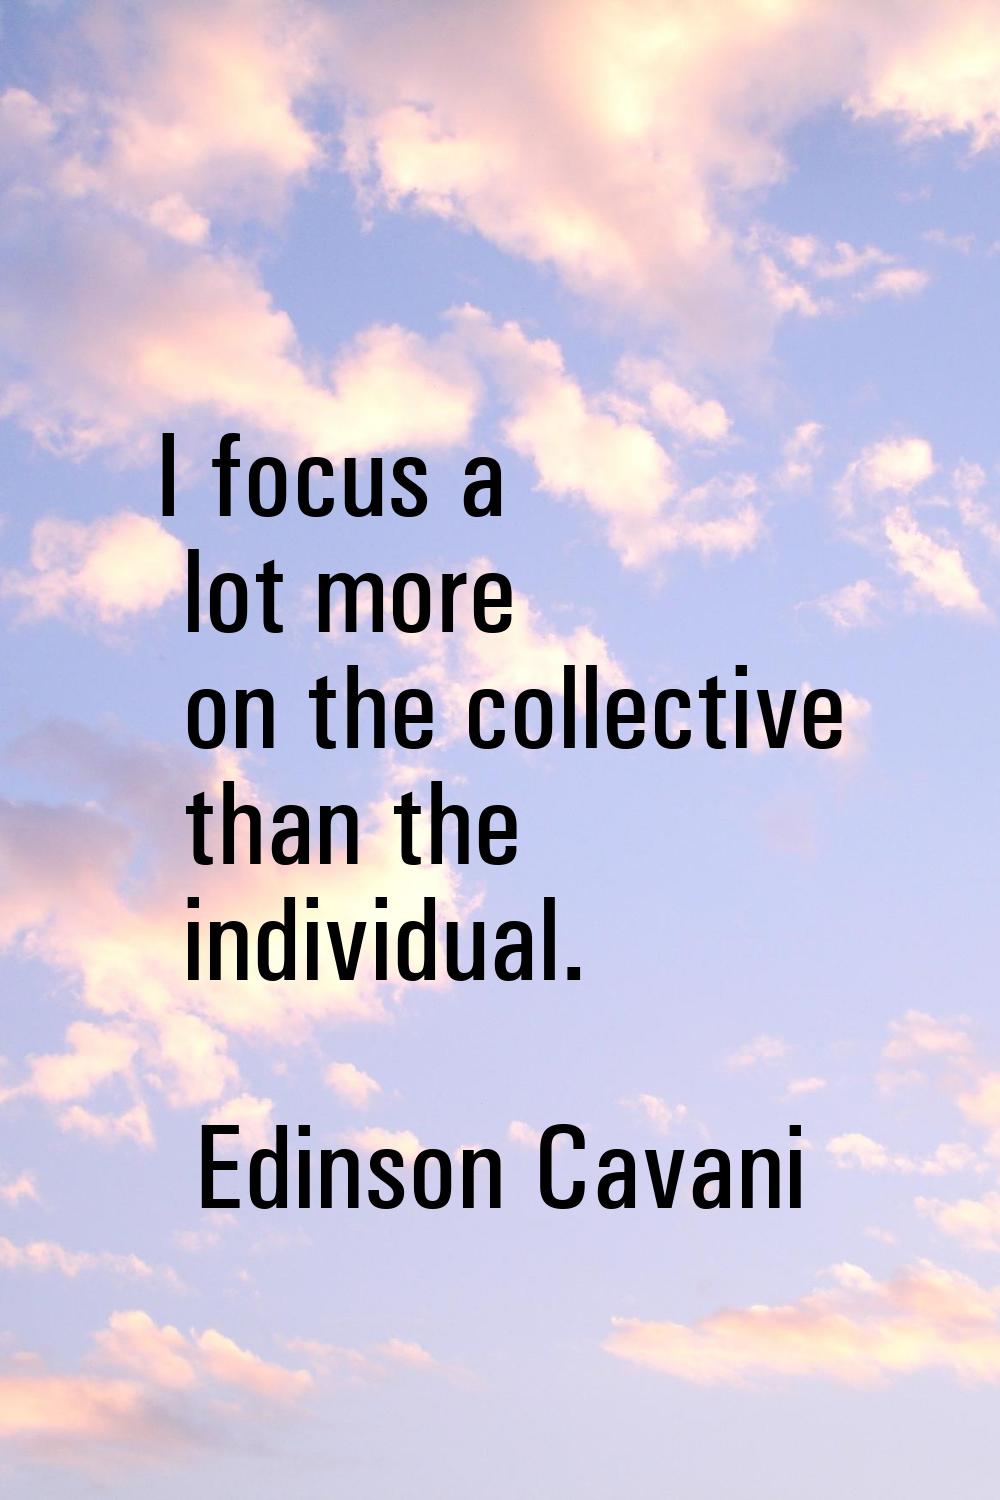 I focus a lot more on the collective than the individual.